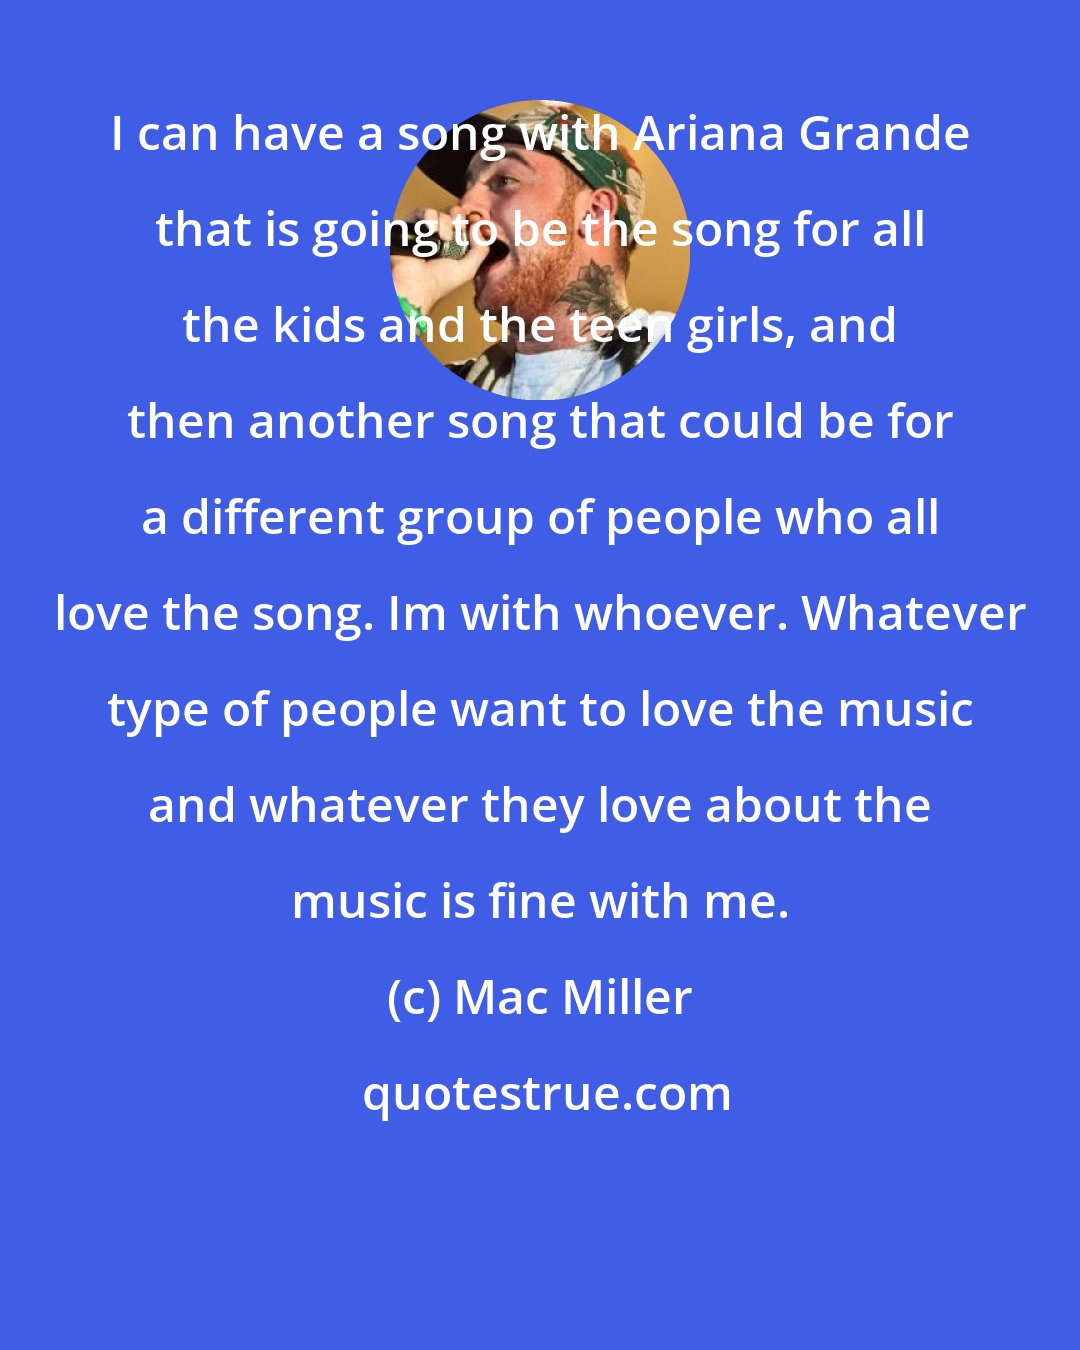 Mac Miller: I can have a song with Ariana Grande that is going to be the song for all the kids and the teen girls, and then another song that could be for a different group of people who all love the song. Im with whoever. Whatever type of people want to love the music and whatever they love about the music is fine with me.